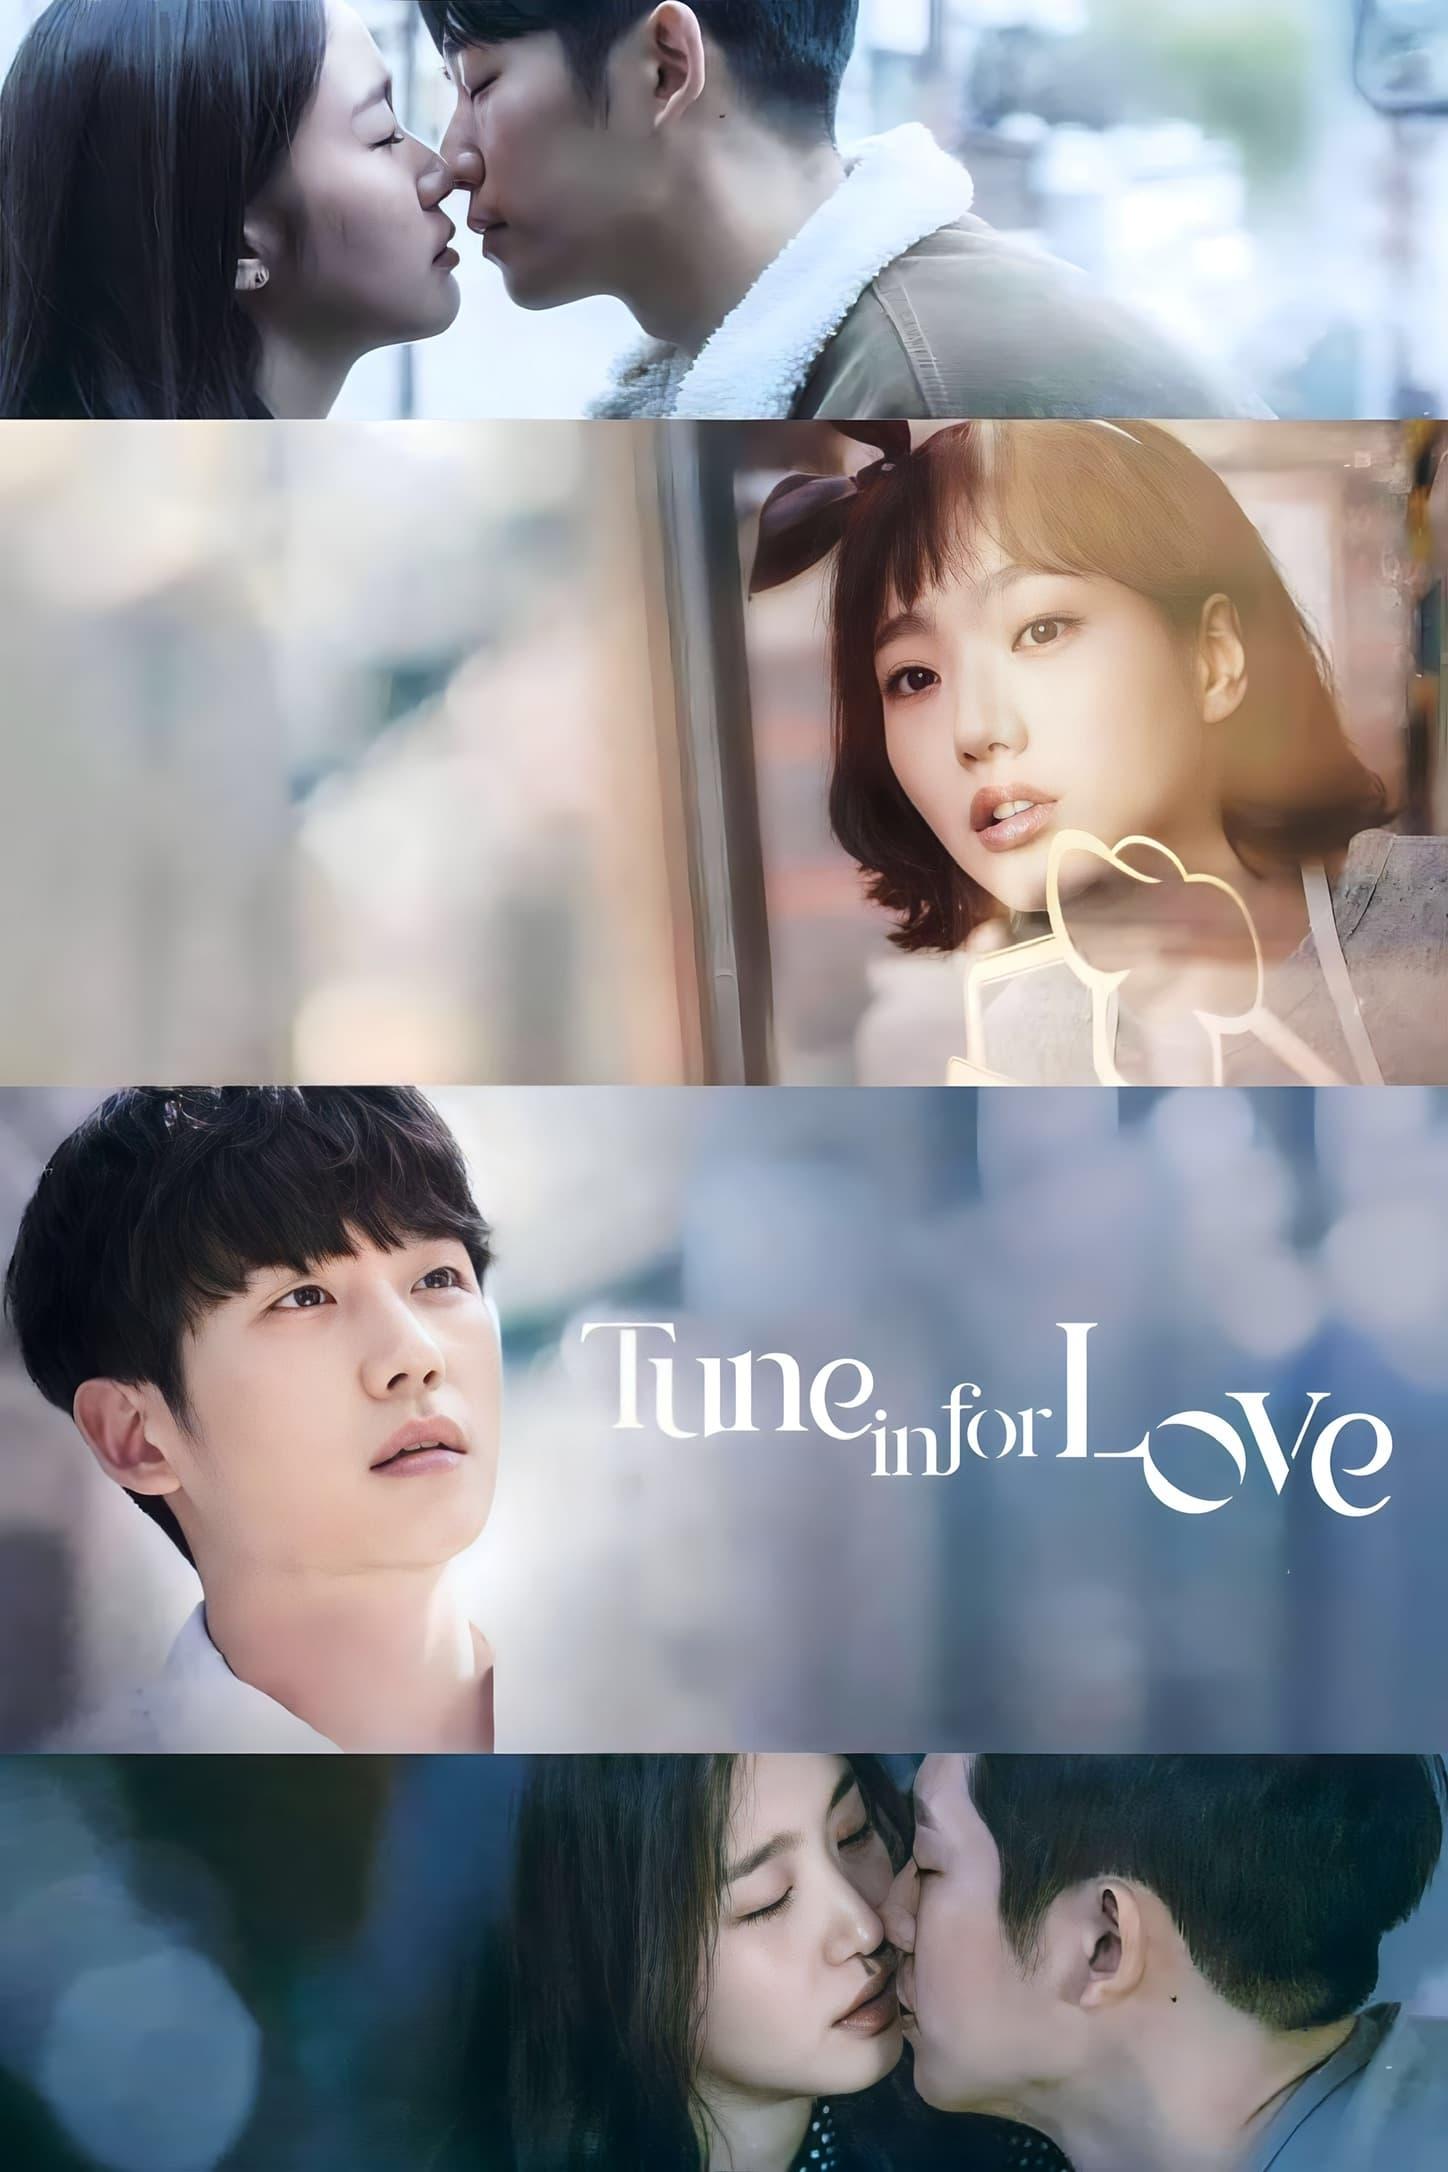 Tune in for Love poster